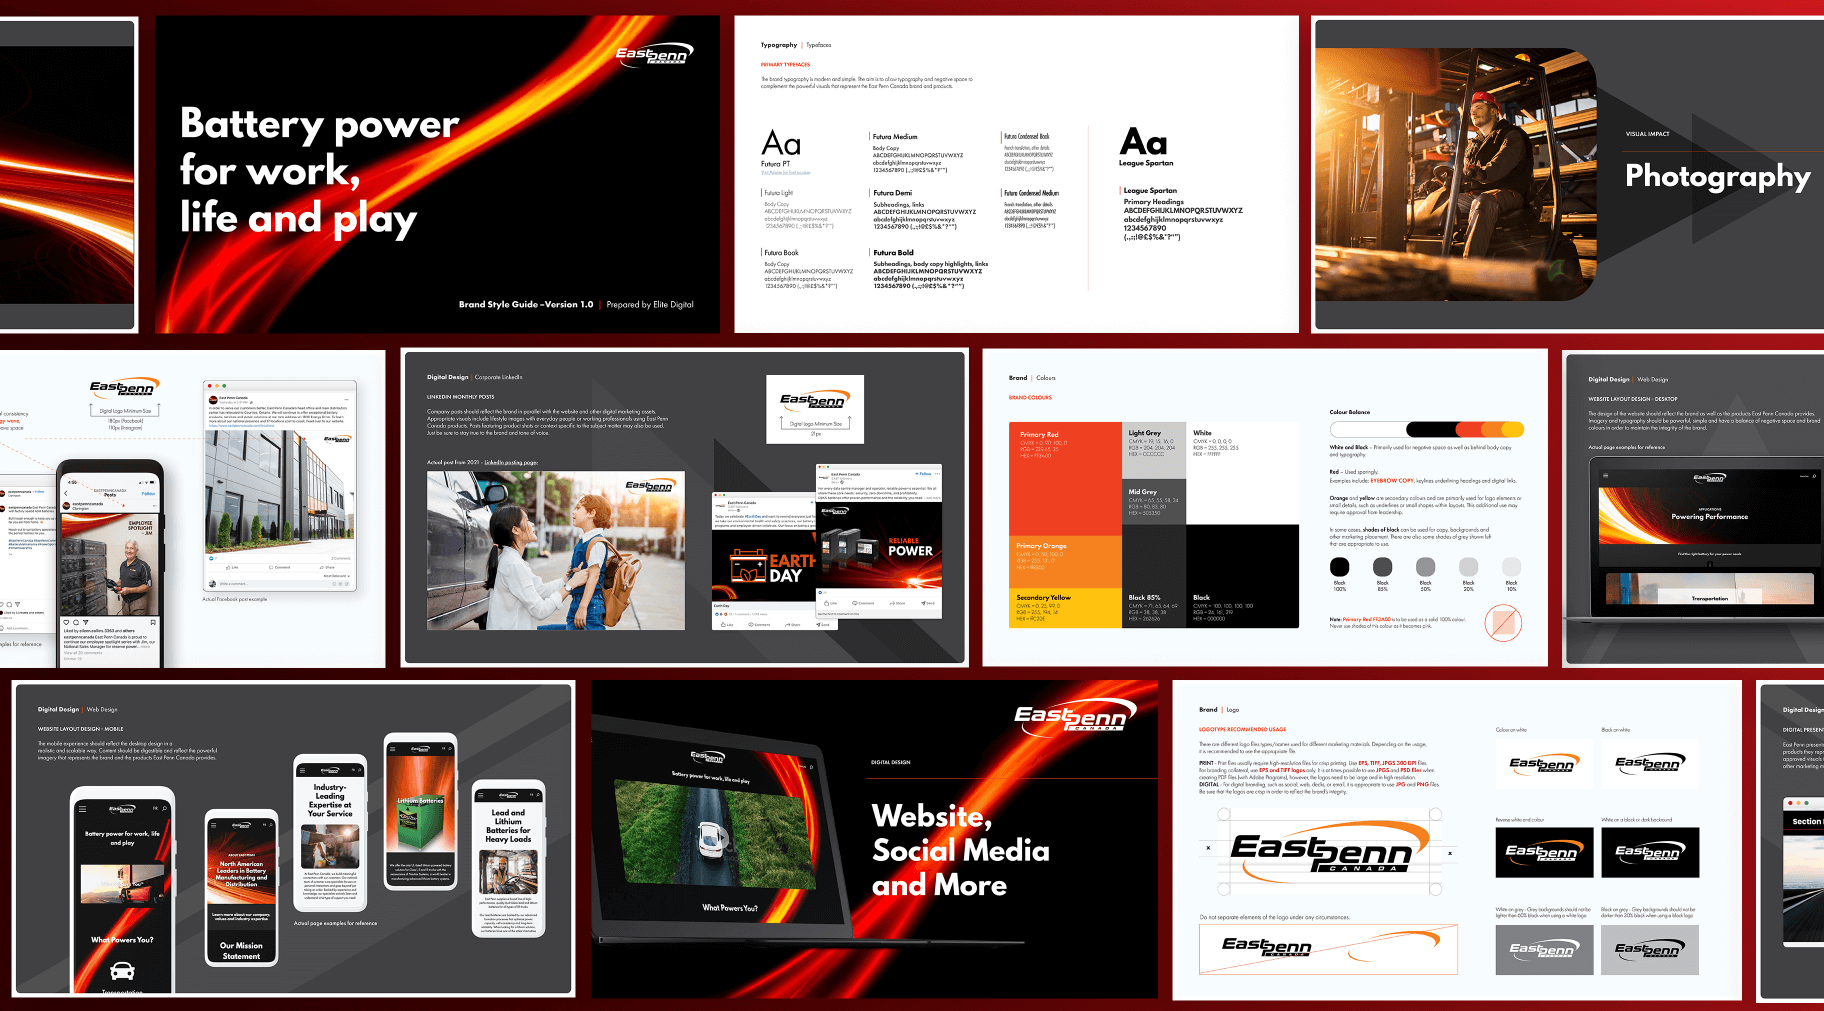 An overview of Elite Digital’s re-brand campaign for East Penn that included a new website, social media assets, YouTube campaign, brand guidelines and more.